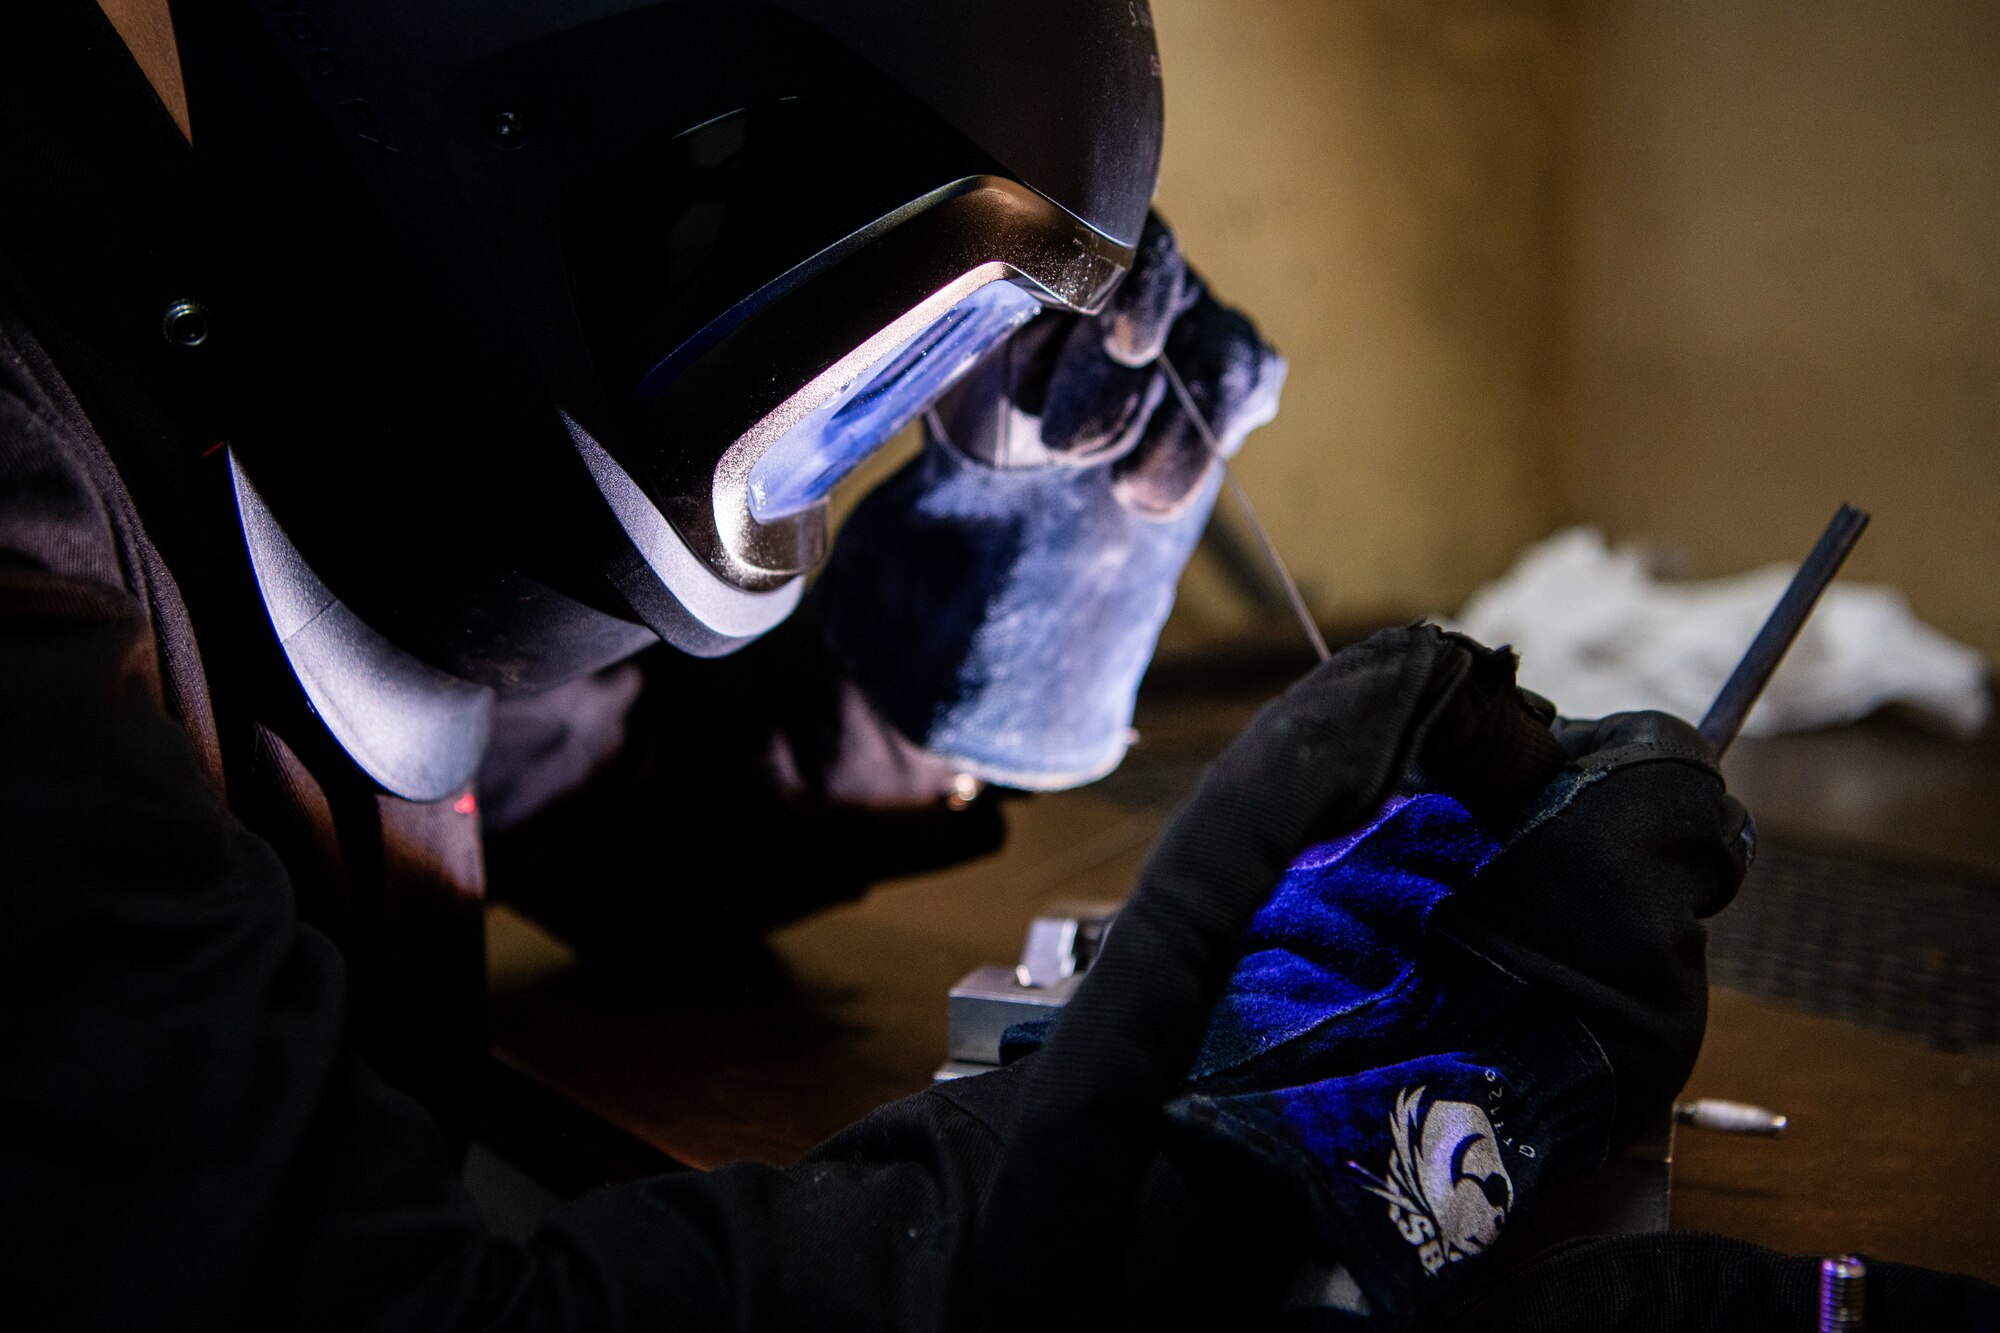 A metals technician welds with a mask on.